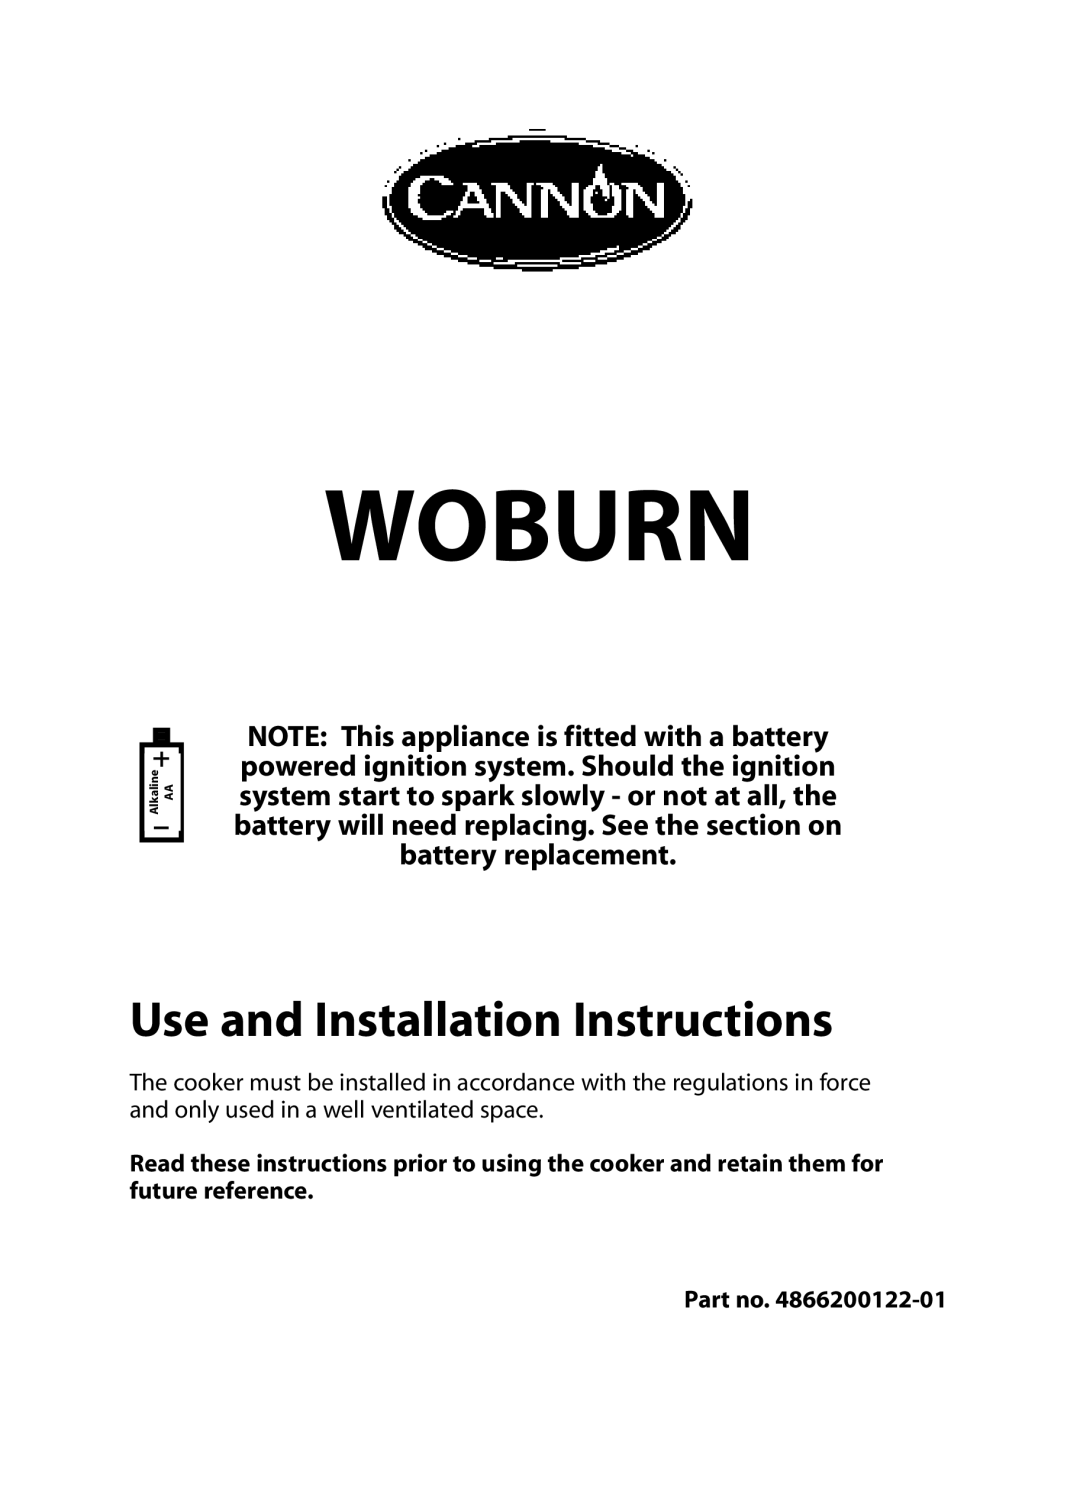 Cannon 10565G, 10566G, 10560G, 10562G installation instructions Woburn, Use and Installation Instructions 